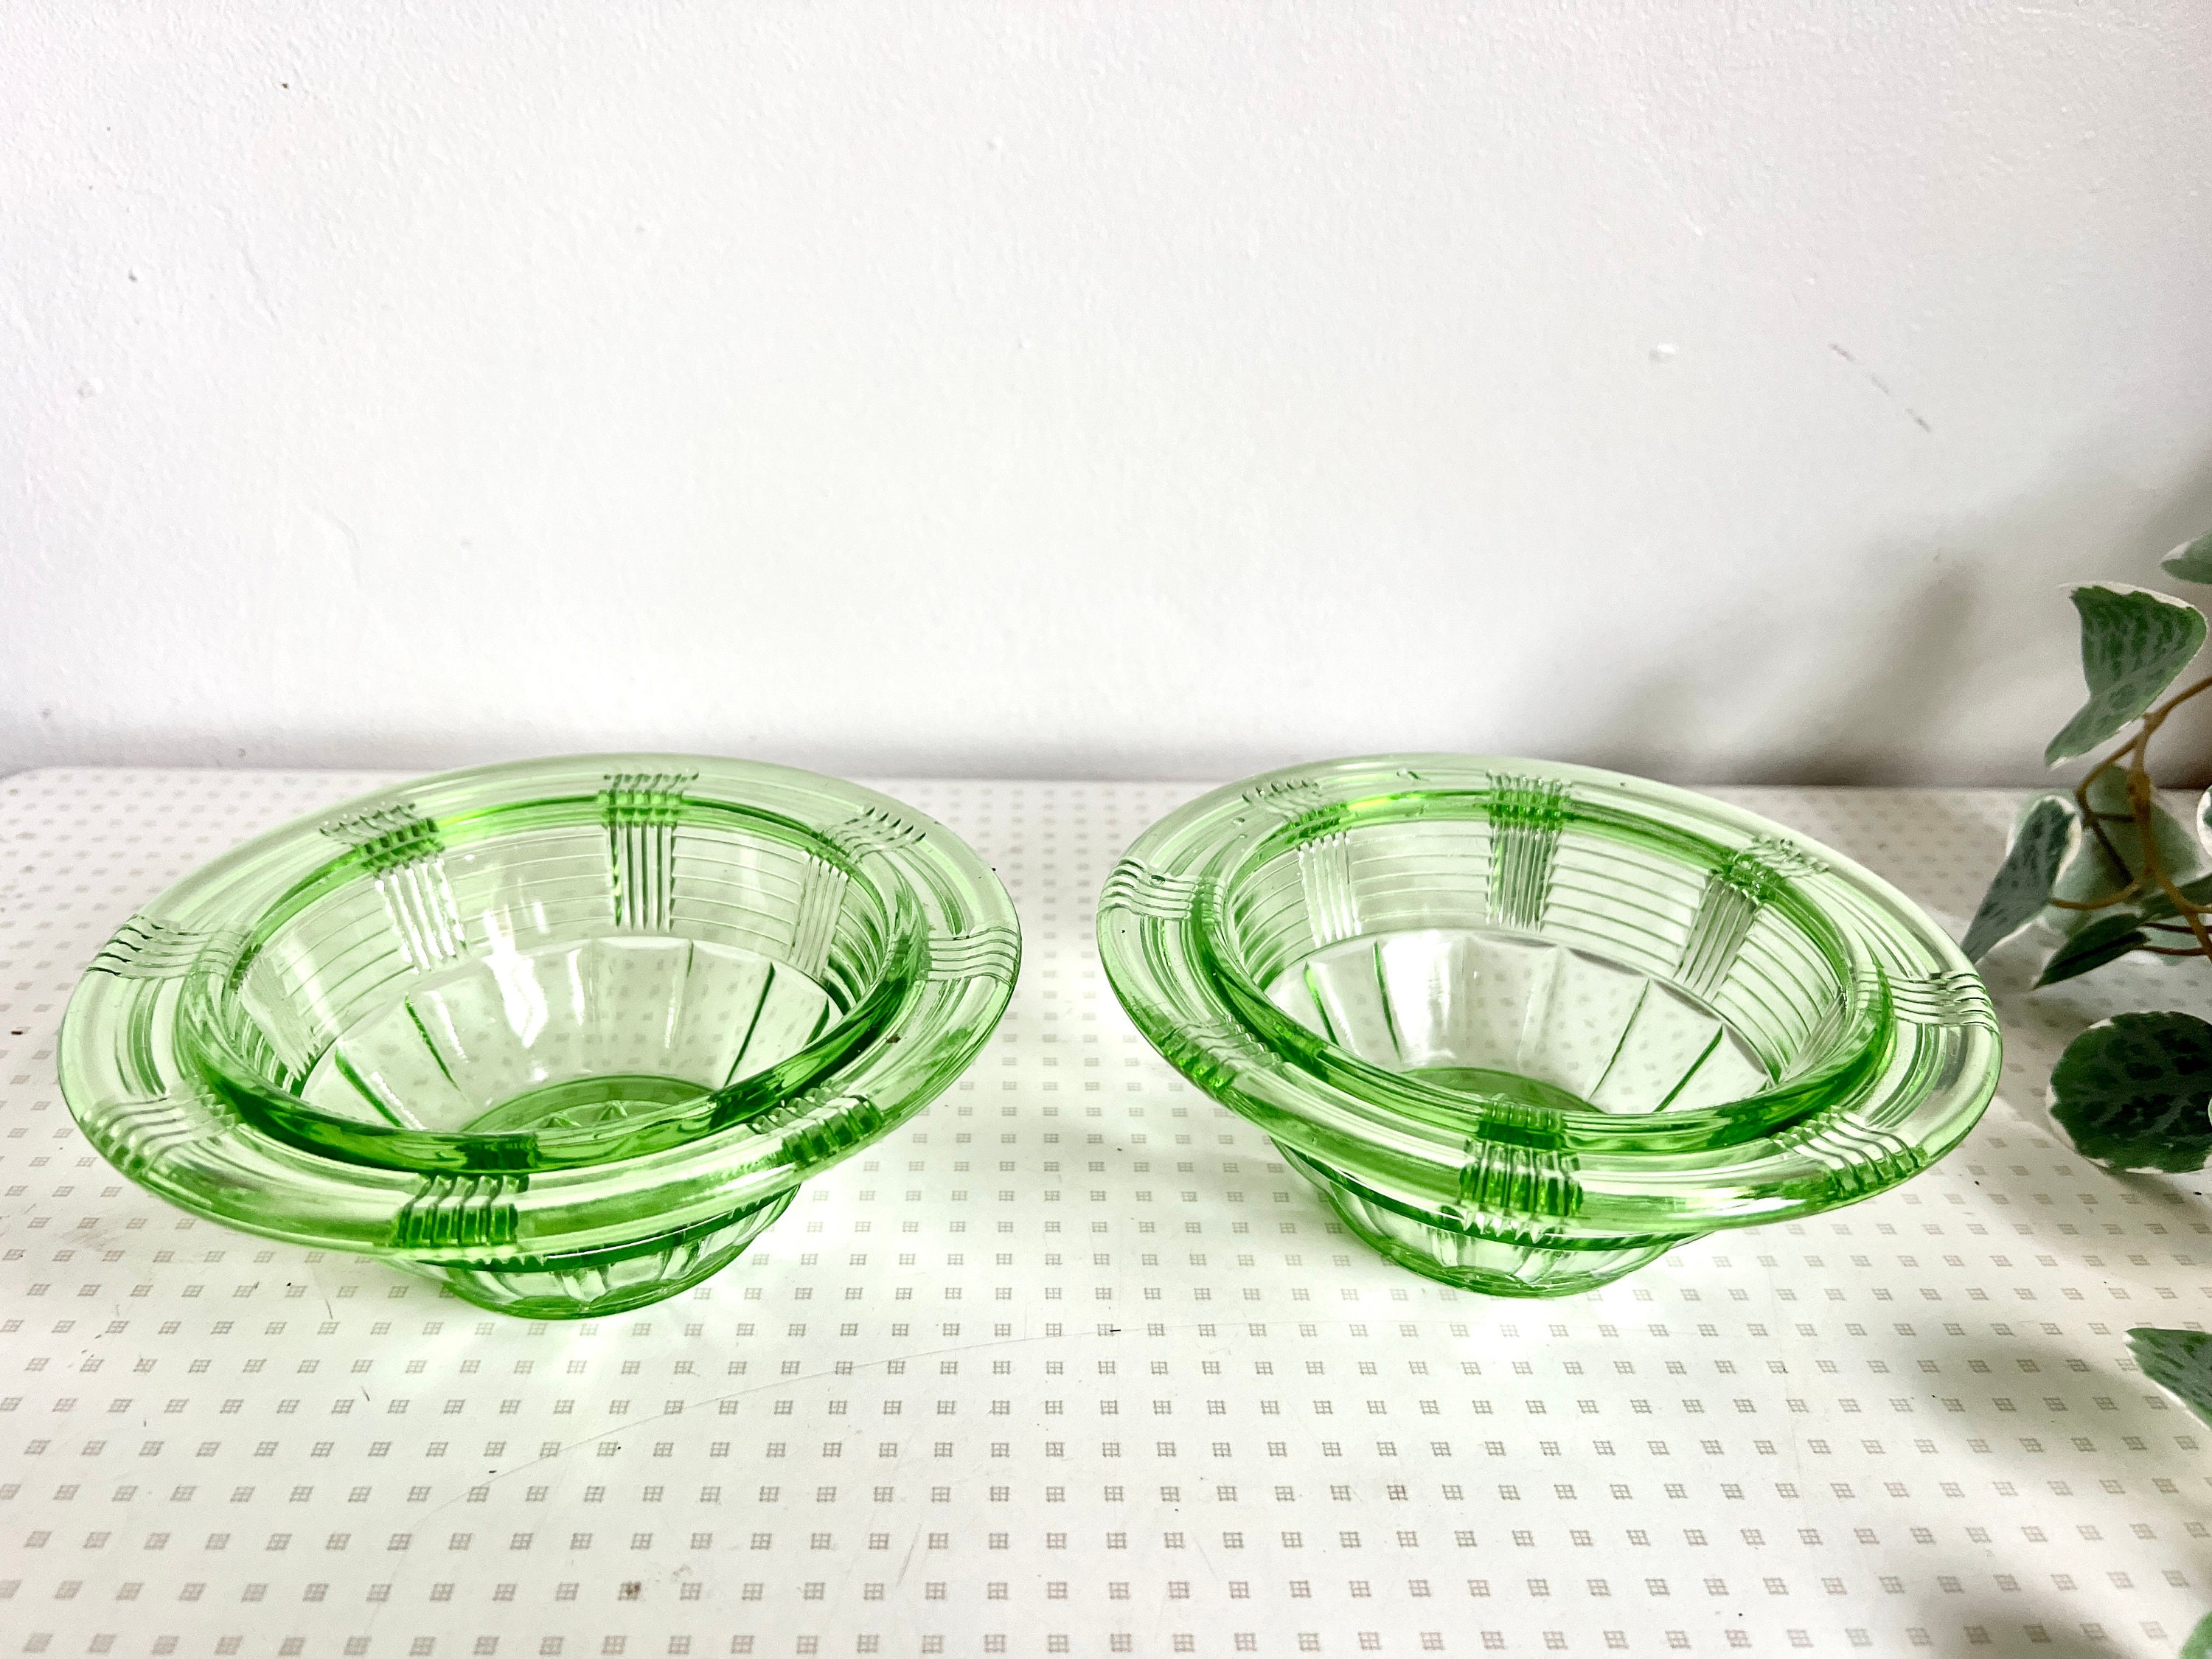 Vintage Green Depression Glass Nesting Bowls Rolled Edge Mixing Bowls 2